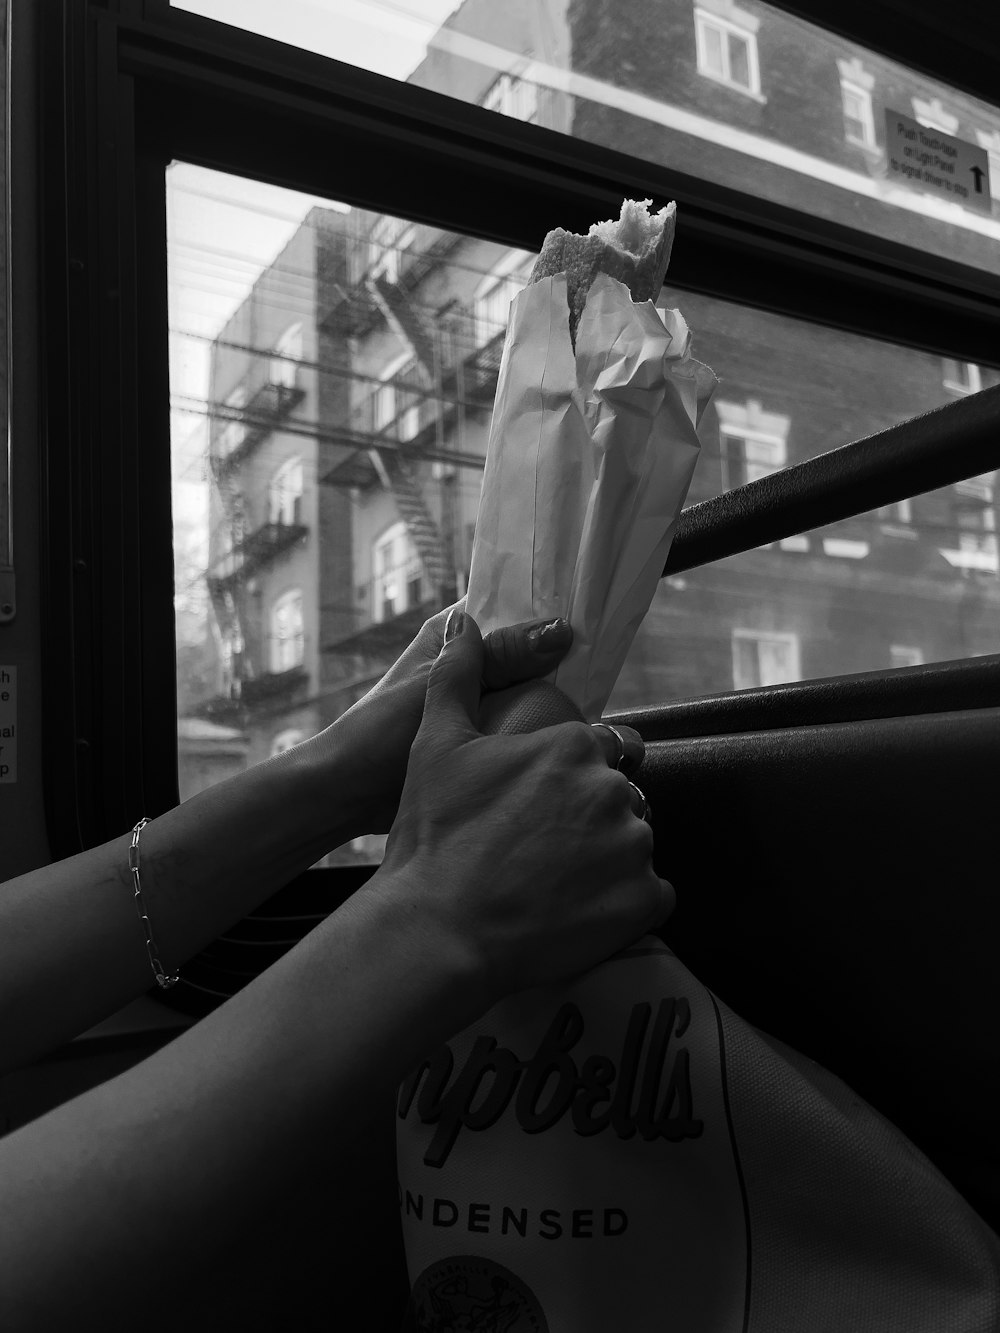 a person holding a paper bag on a bus